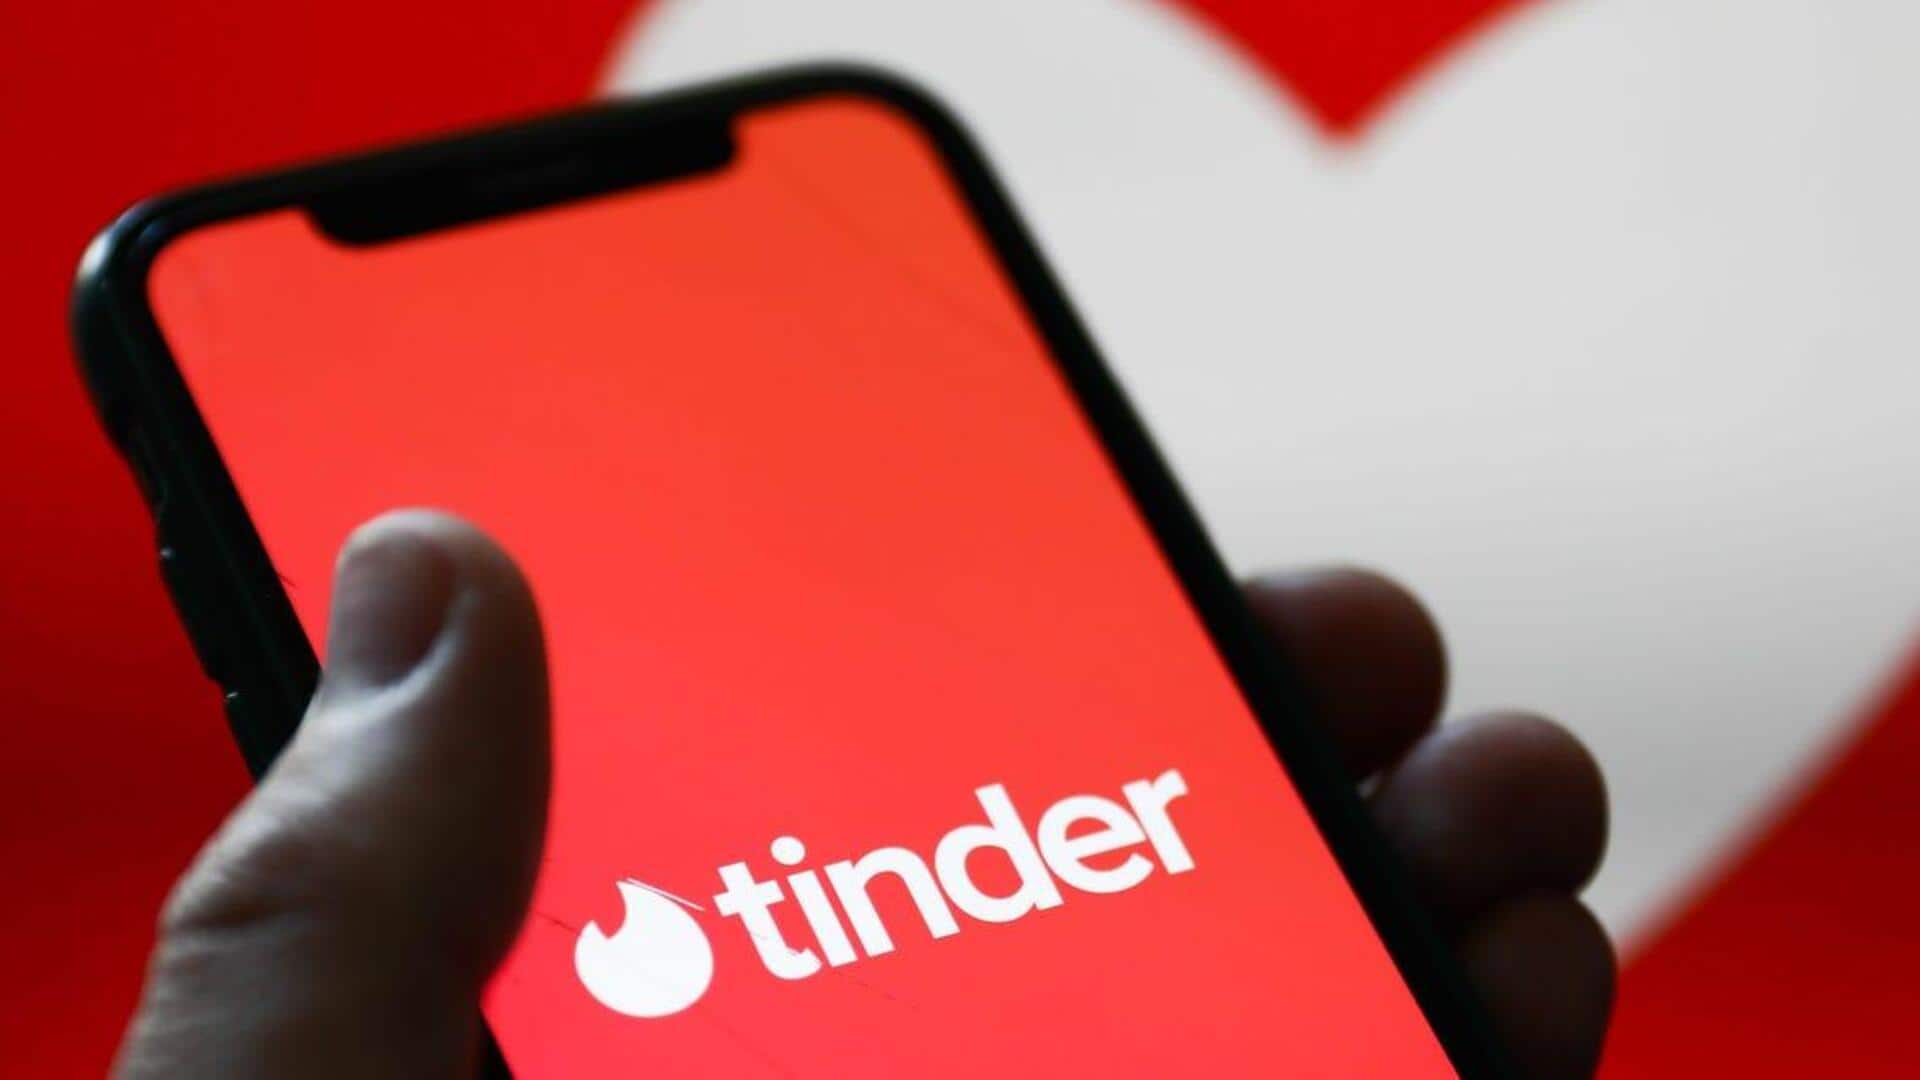 Tinder introduces 'Share My Date' feature: How it works